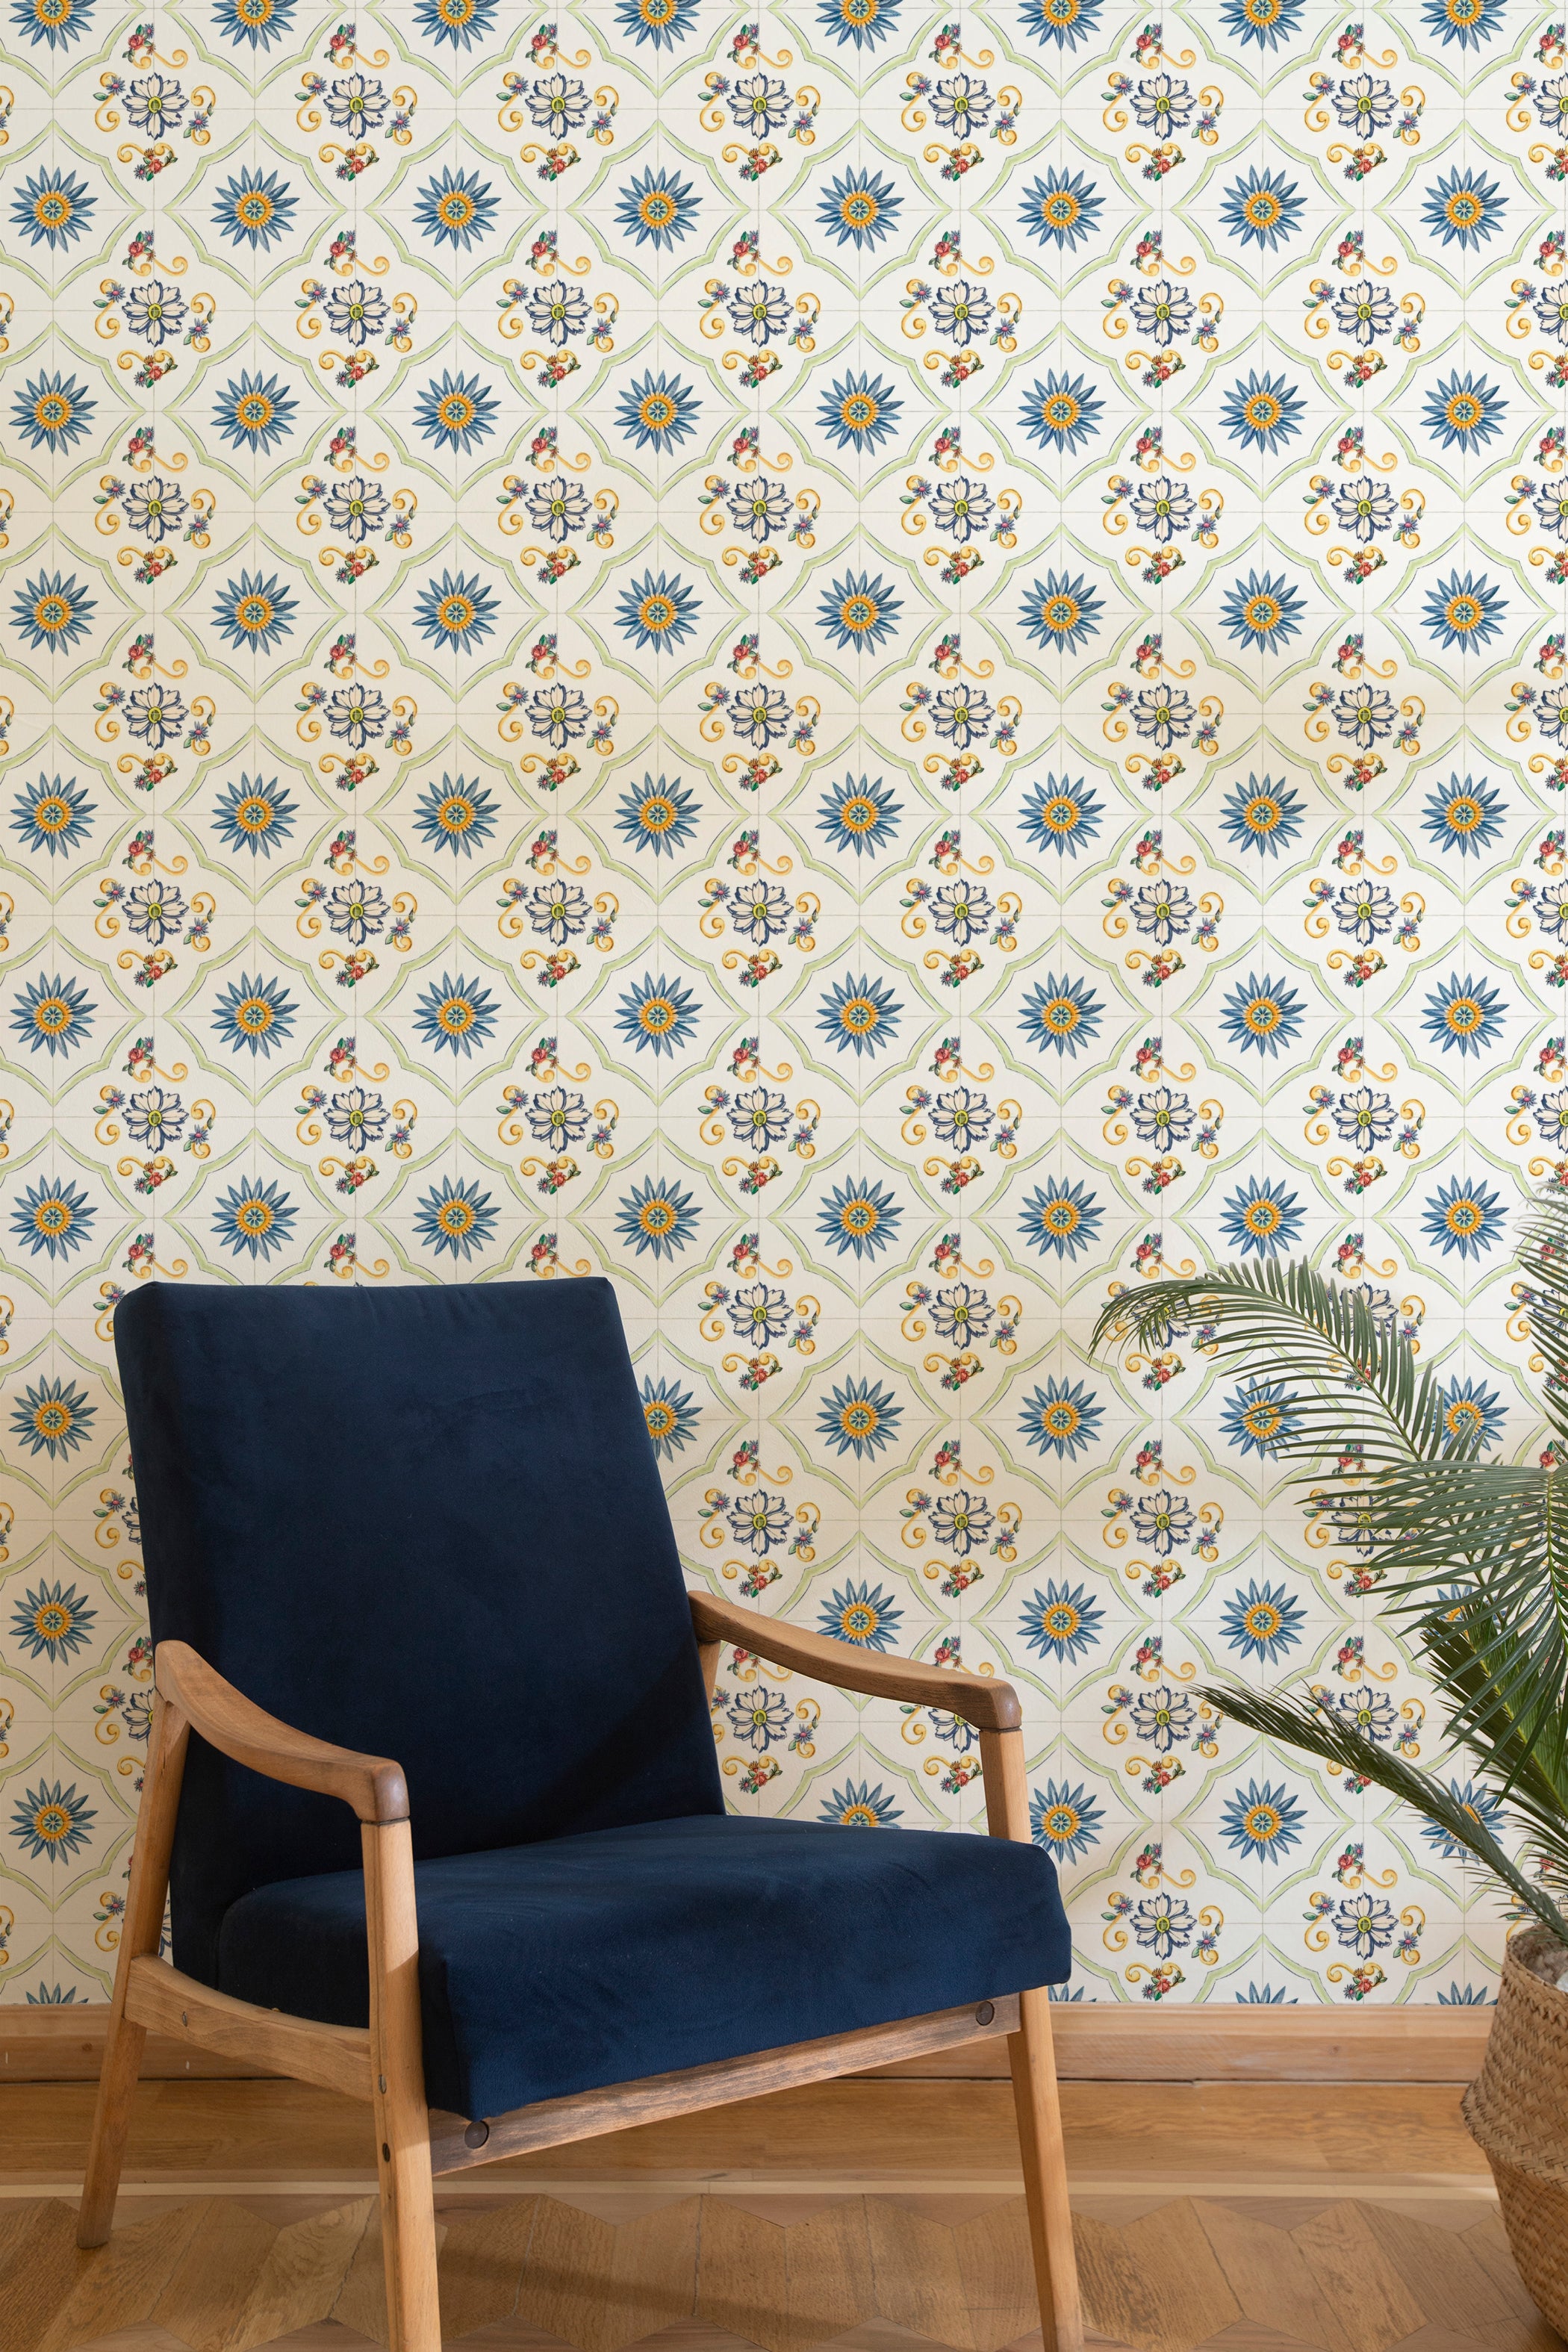 A cozy living room corner featuring a navy blue upholstered wooden chair against a backdrop of Spanish Tile Wallpaper, which displays a repetitive pattern of blue and yellow sunbursts with floral accents. The room has a light wooden floor, and a potted palm adds a touch of greenery.